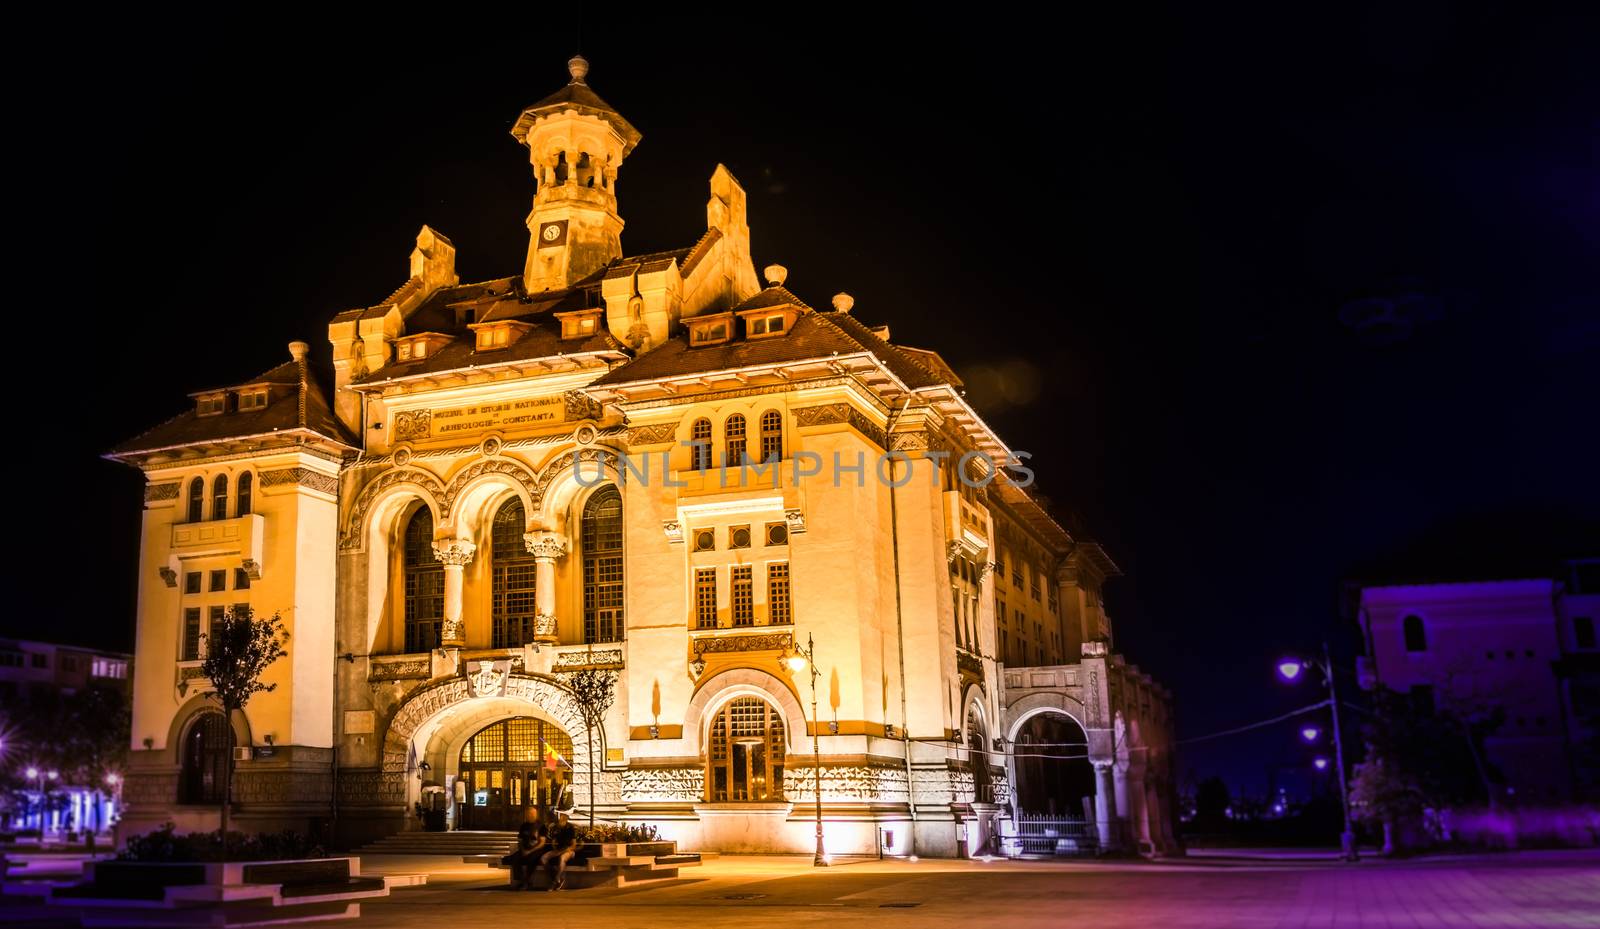 History and Architecture Museum at night in Constanta, Romania.